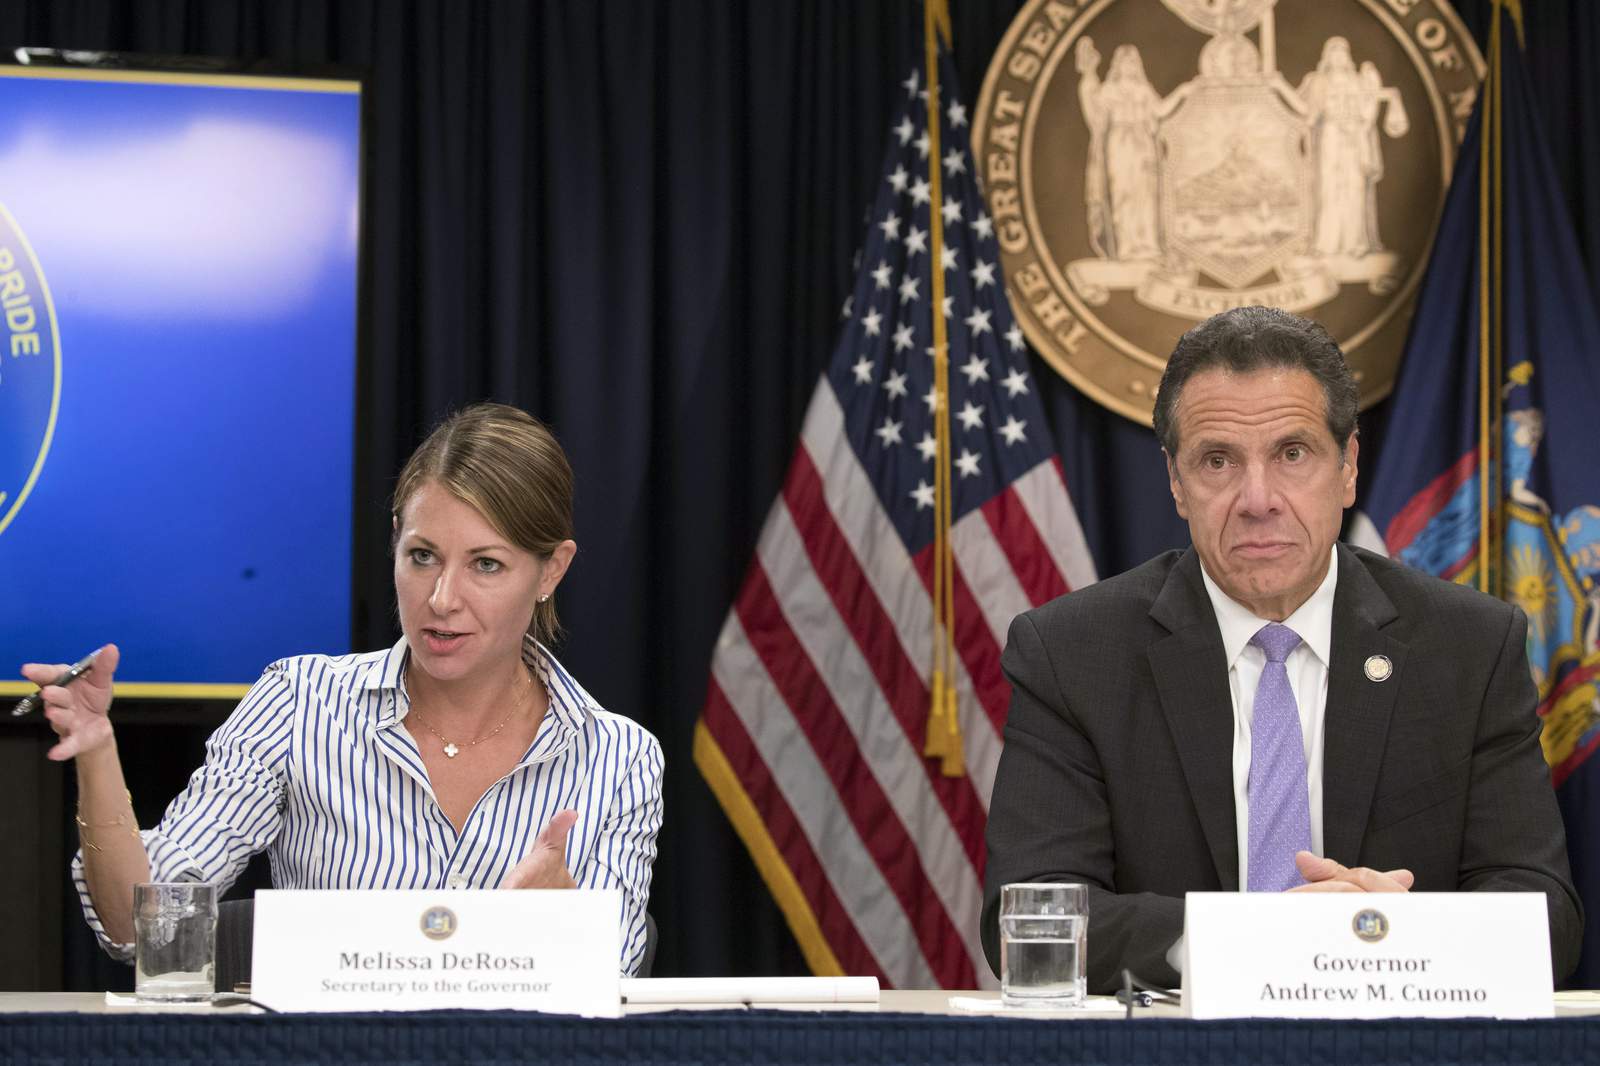 NY officials removed fuller tally of nursing home deaths